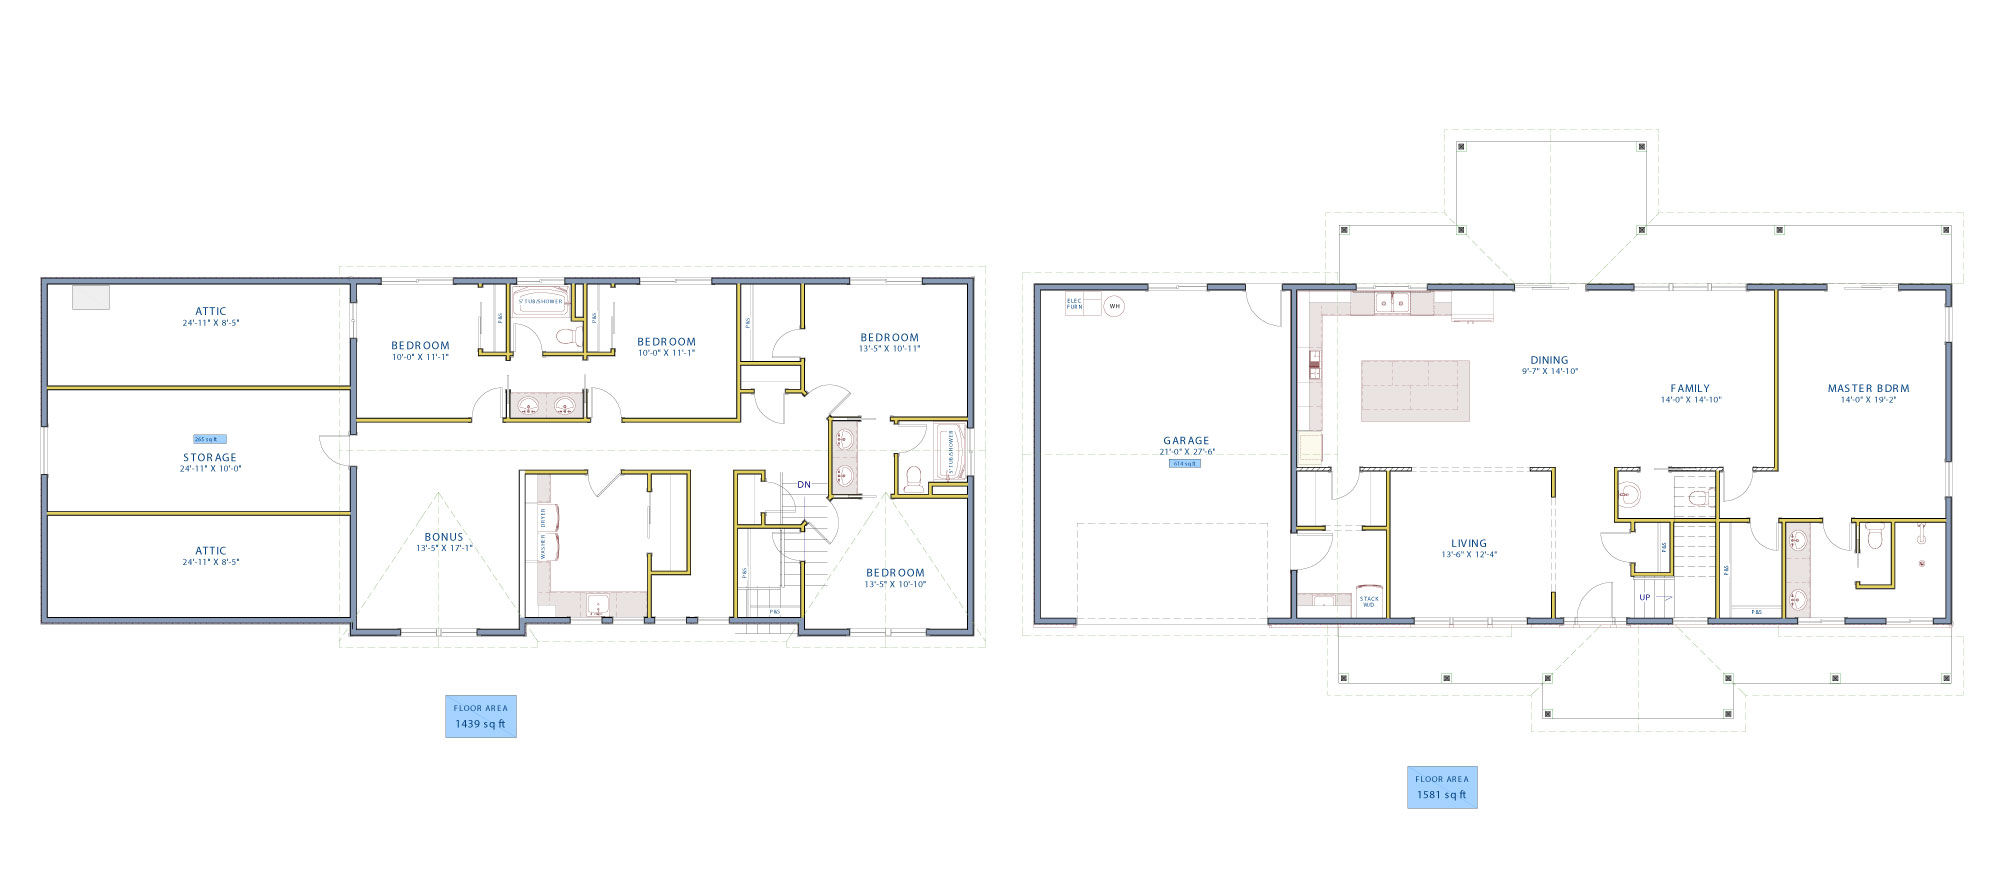 Floor plan of a custom Traditional style home from Design NW